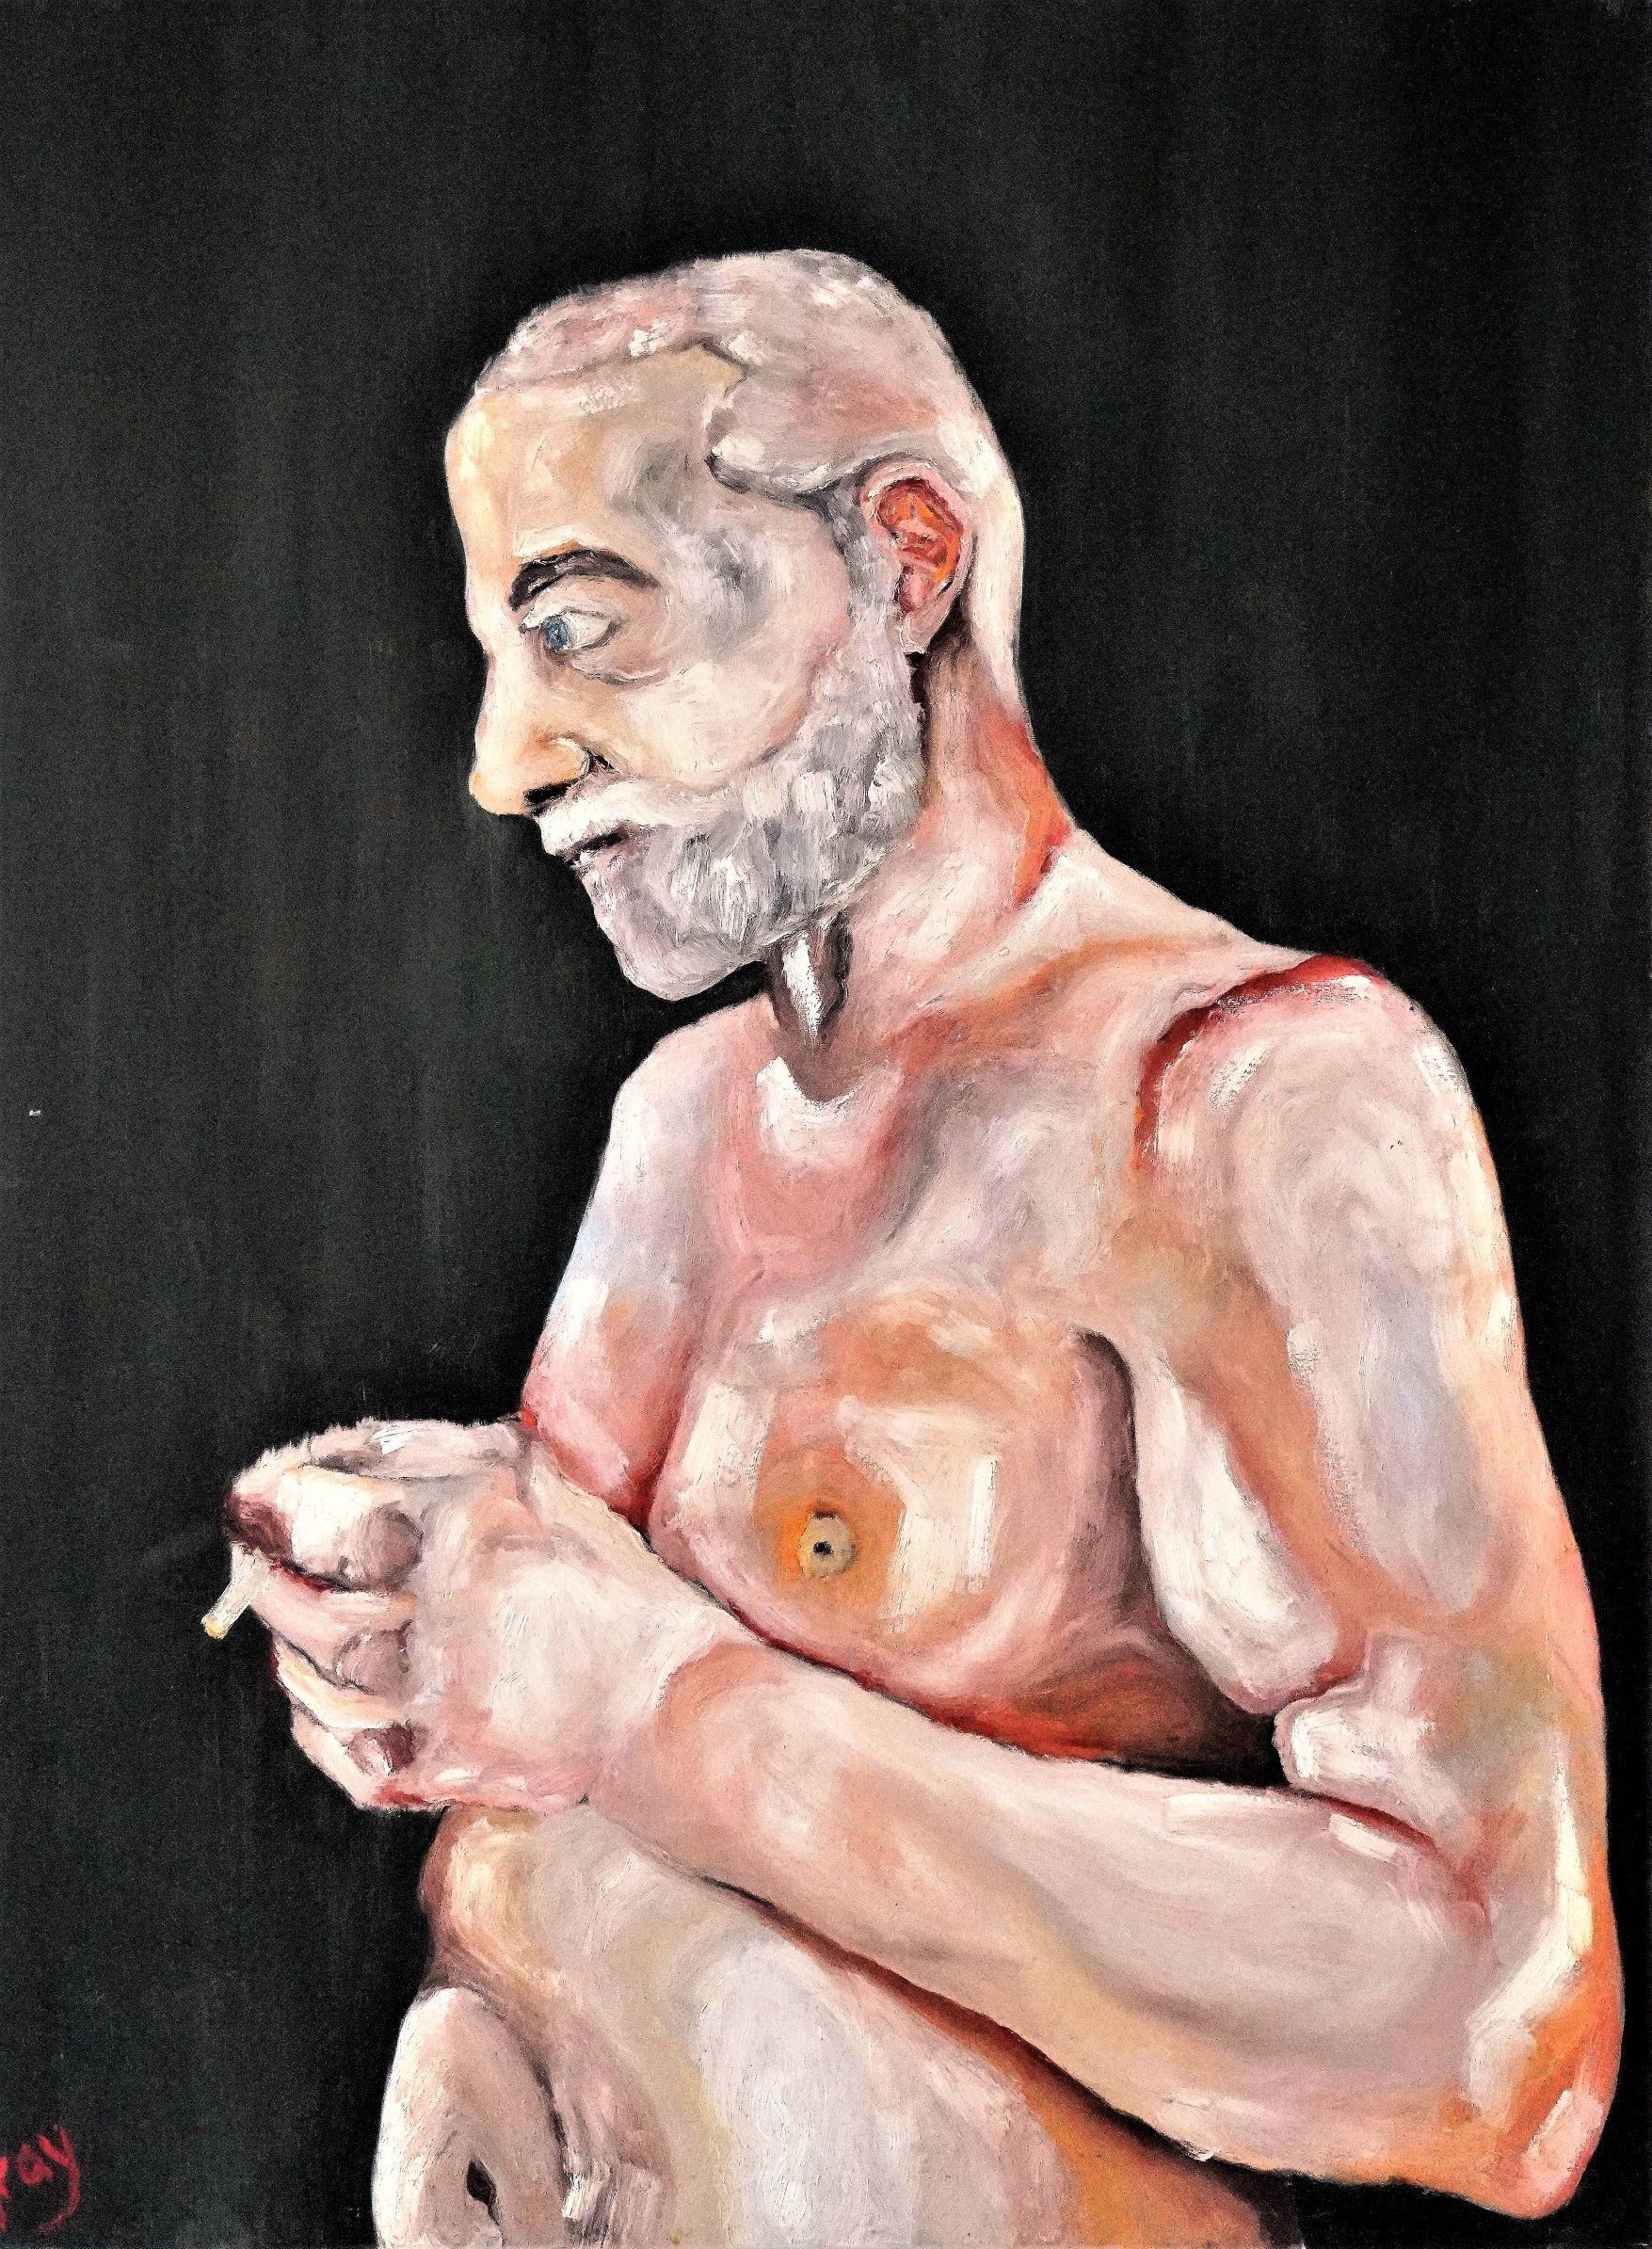 Taken from Gray's most recent exhibition in Prague ''Lost Souls'', based on people who had gone through some recent kind of loss.    The artist managed to capture the man's gaze in a reflective state, perhaps a moment of contemplation. The use of